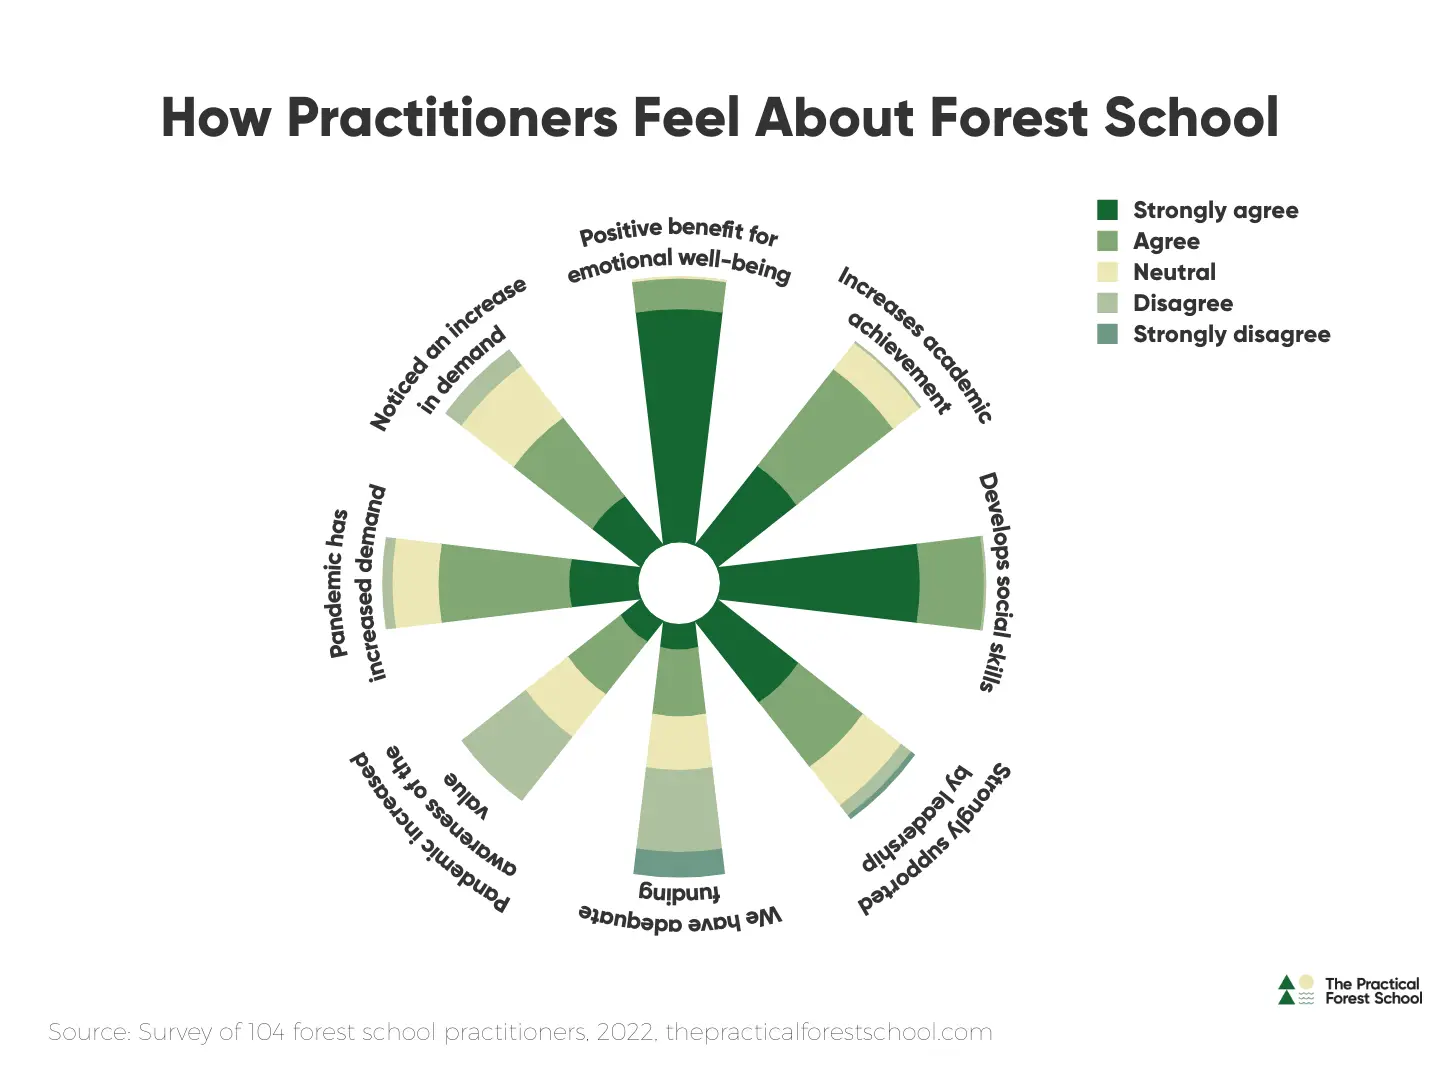 How practitioners feel about forest school graph